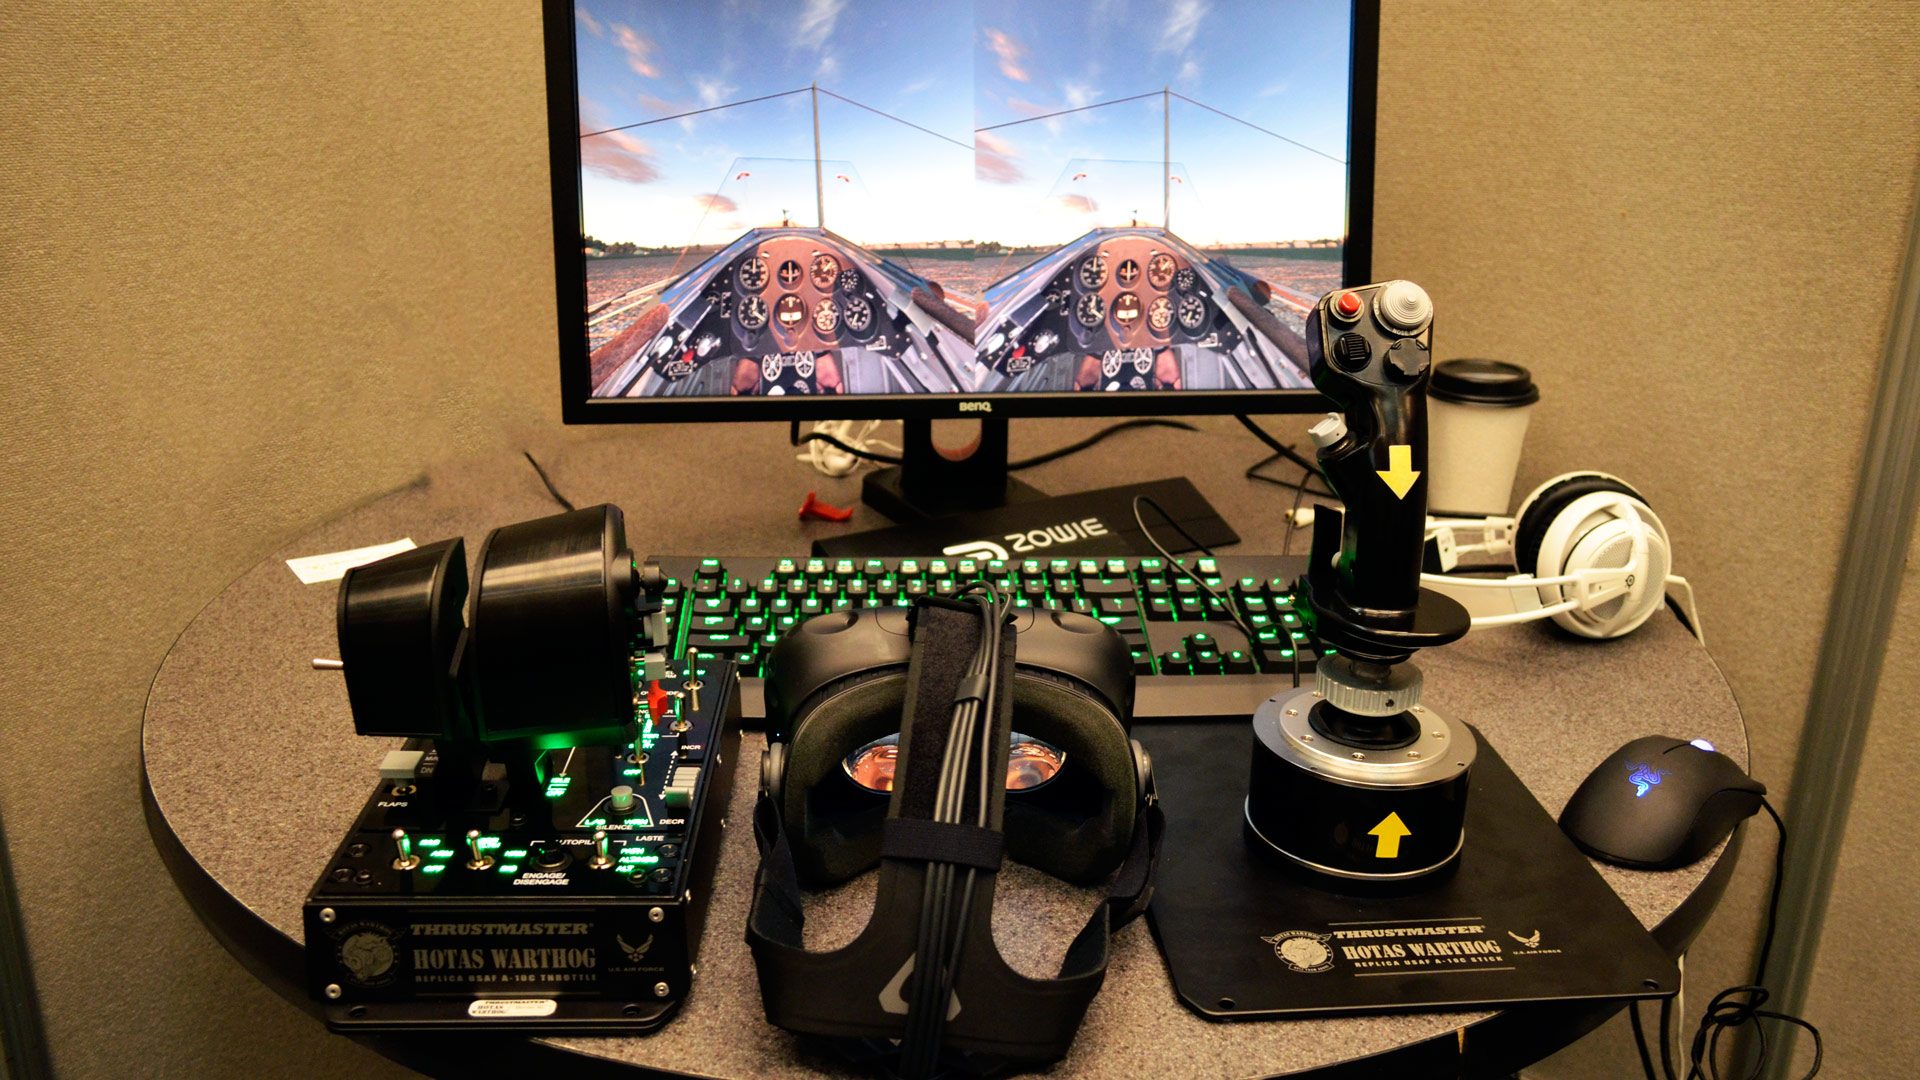 gyldige apt Ung War Thunder' Adds HTC Vive Support – Road to VR